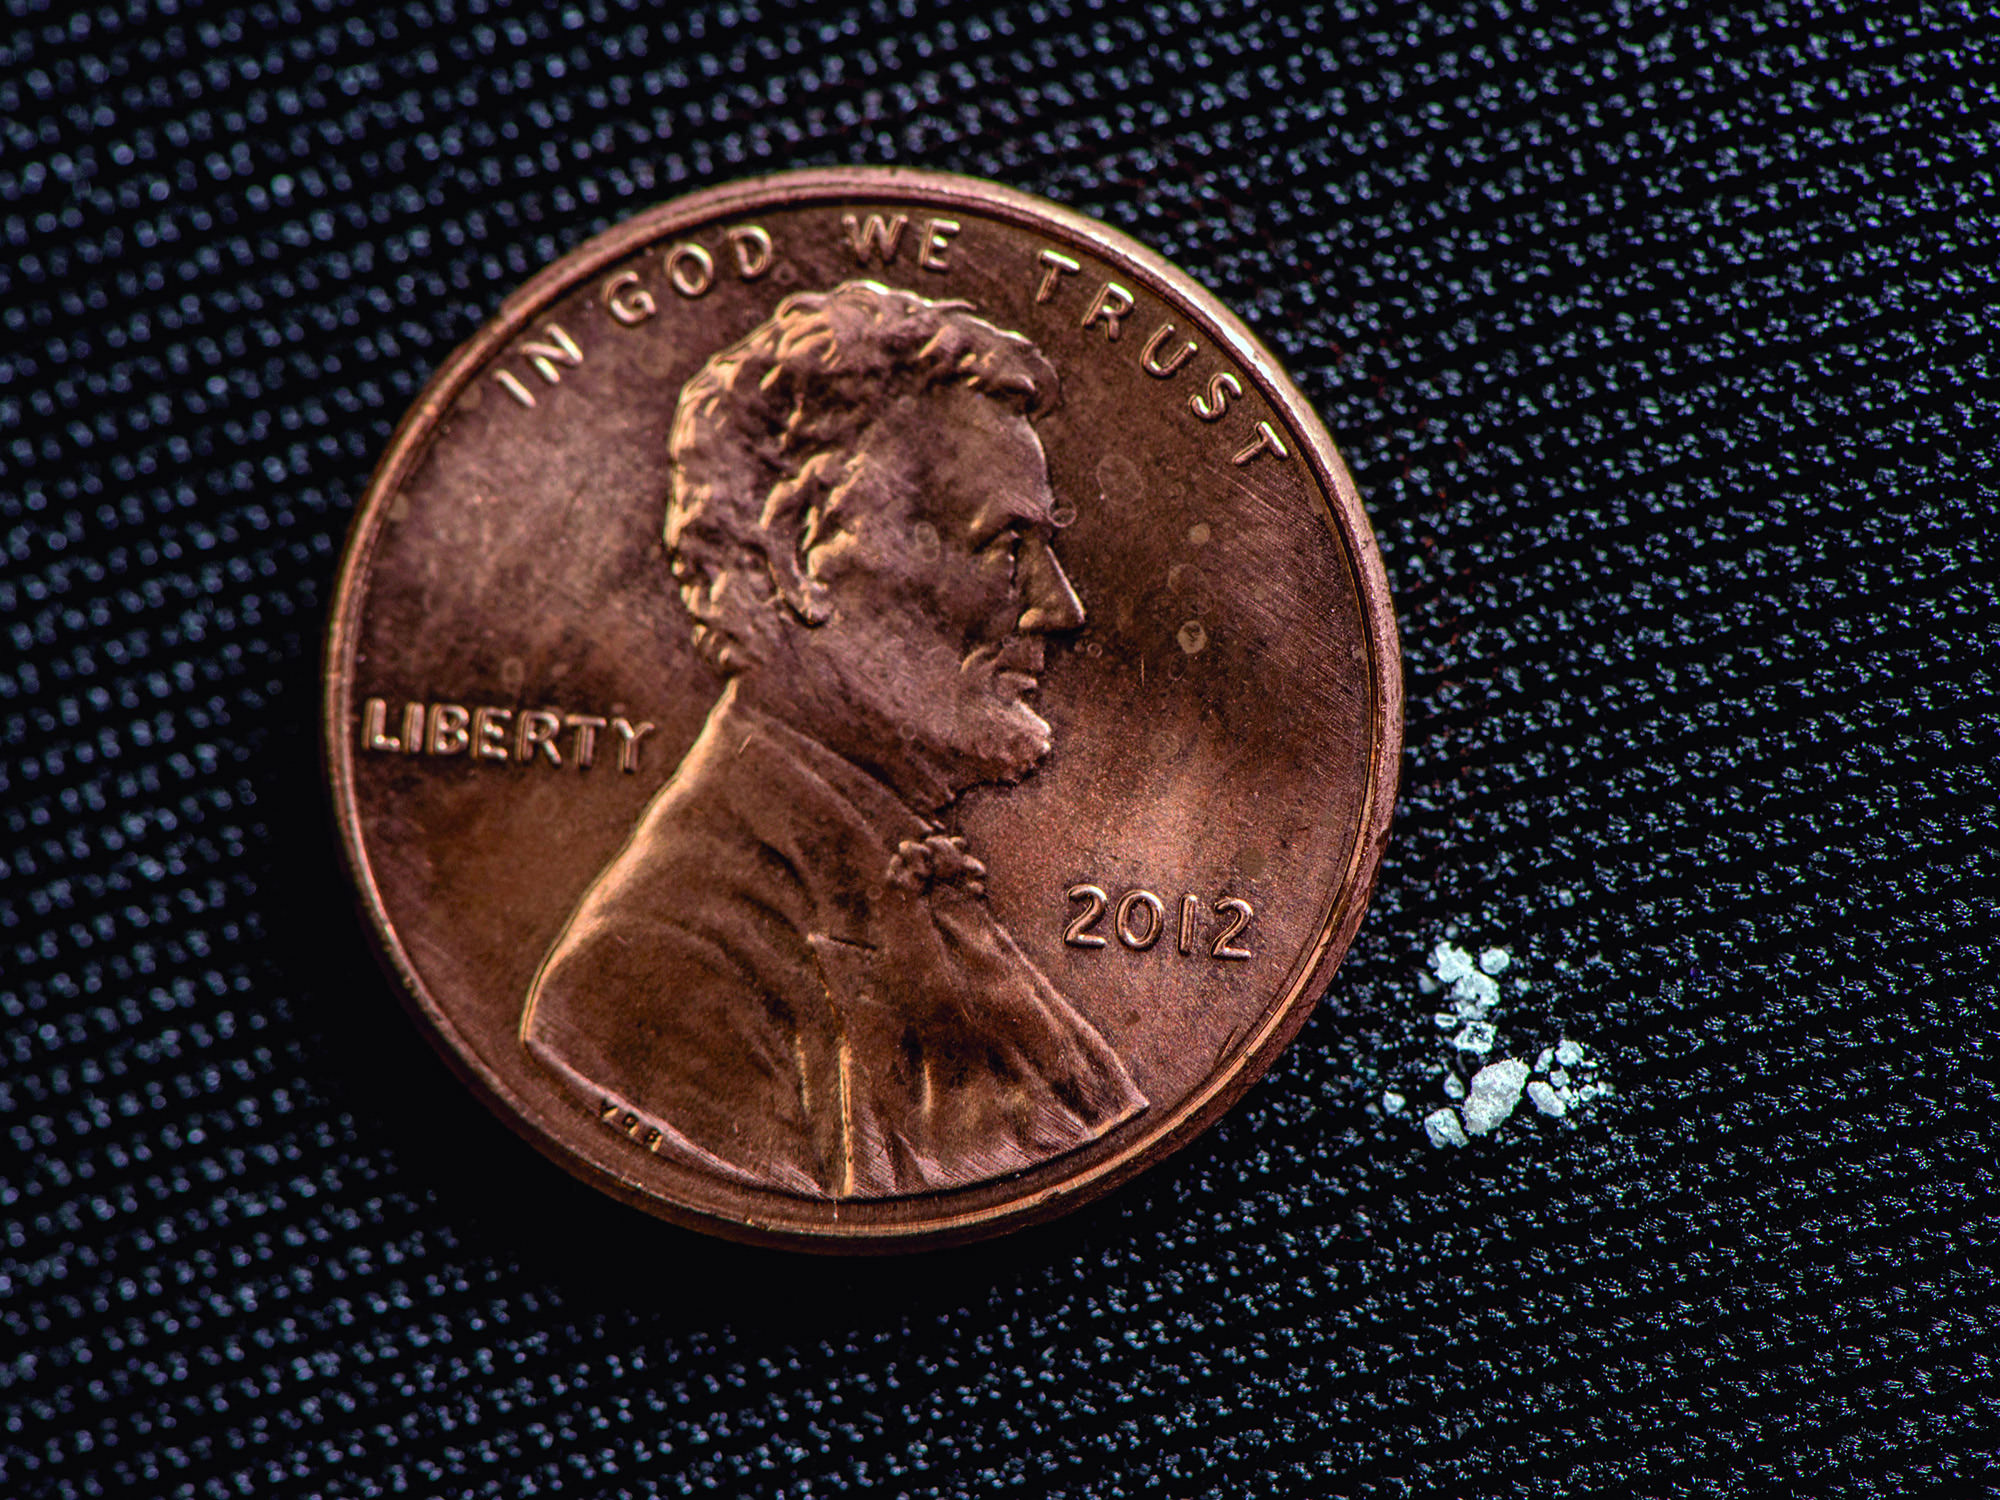 A small but deadly dose of fentanyl next to a penny